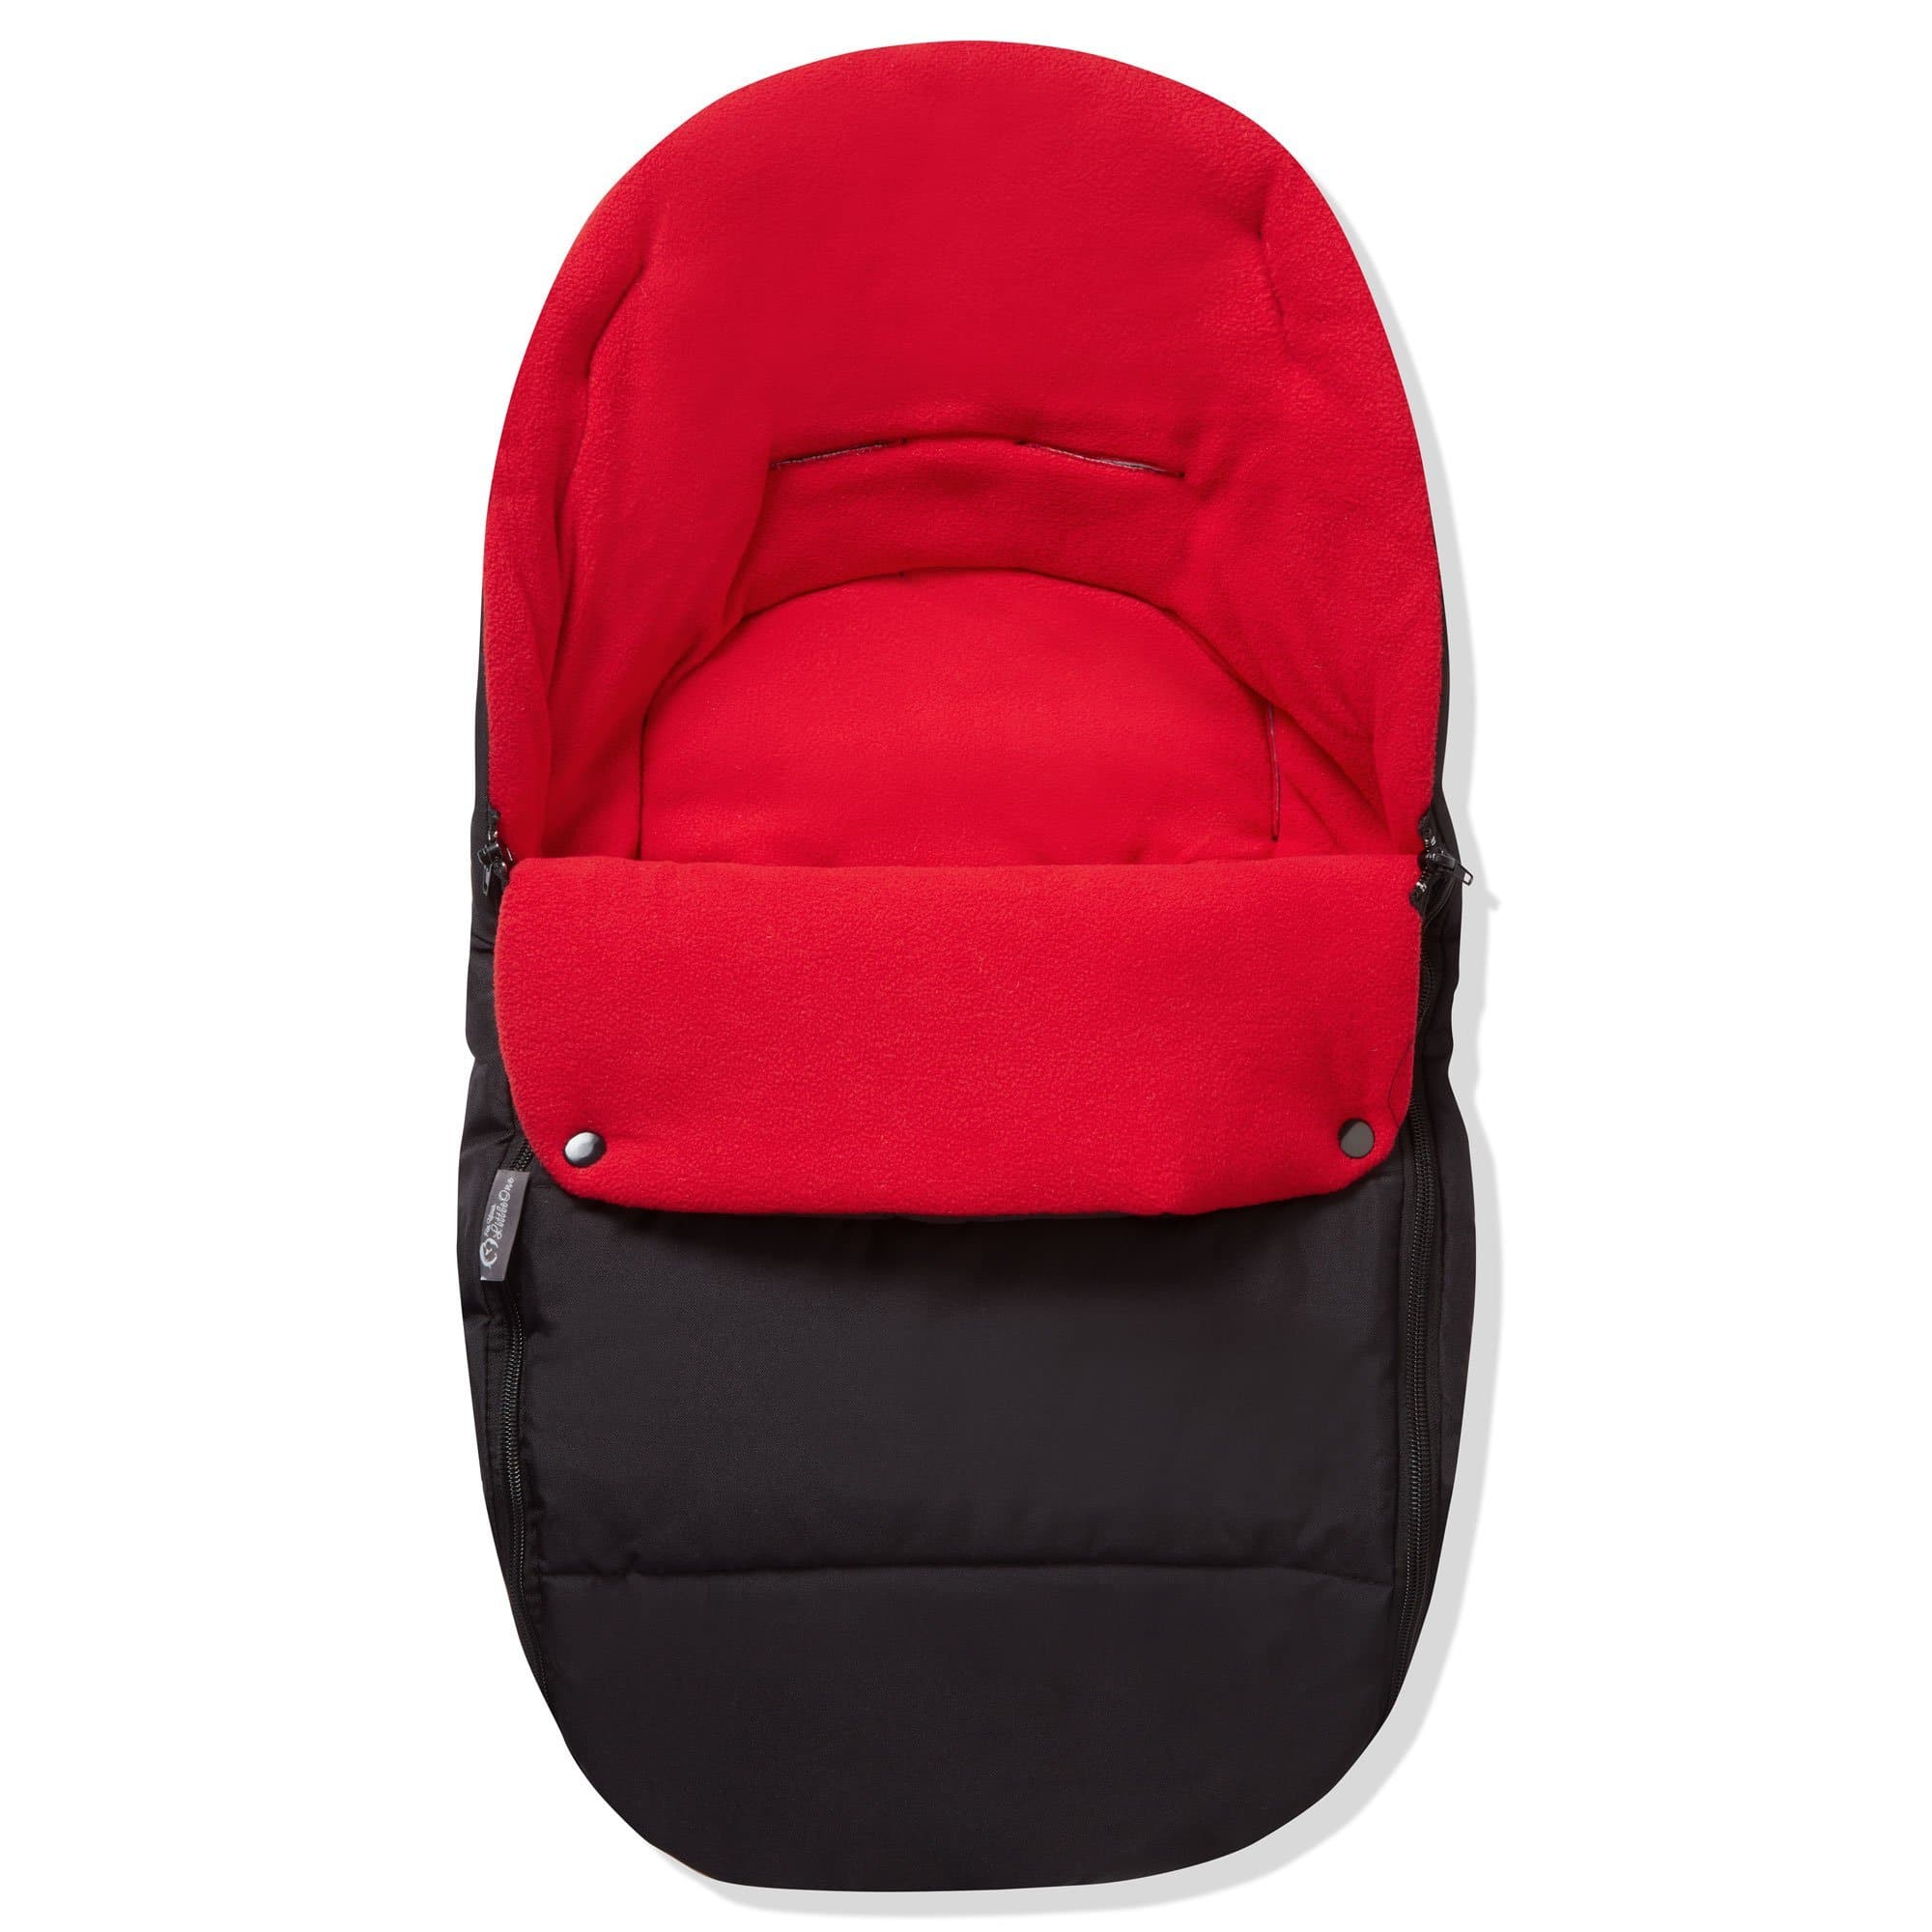 Premium Car Seat Footmuff / Cosy Toes Compatible With Mutsy - Fire Red / Fits All Models | For Your Little One